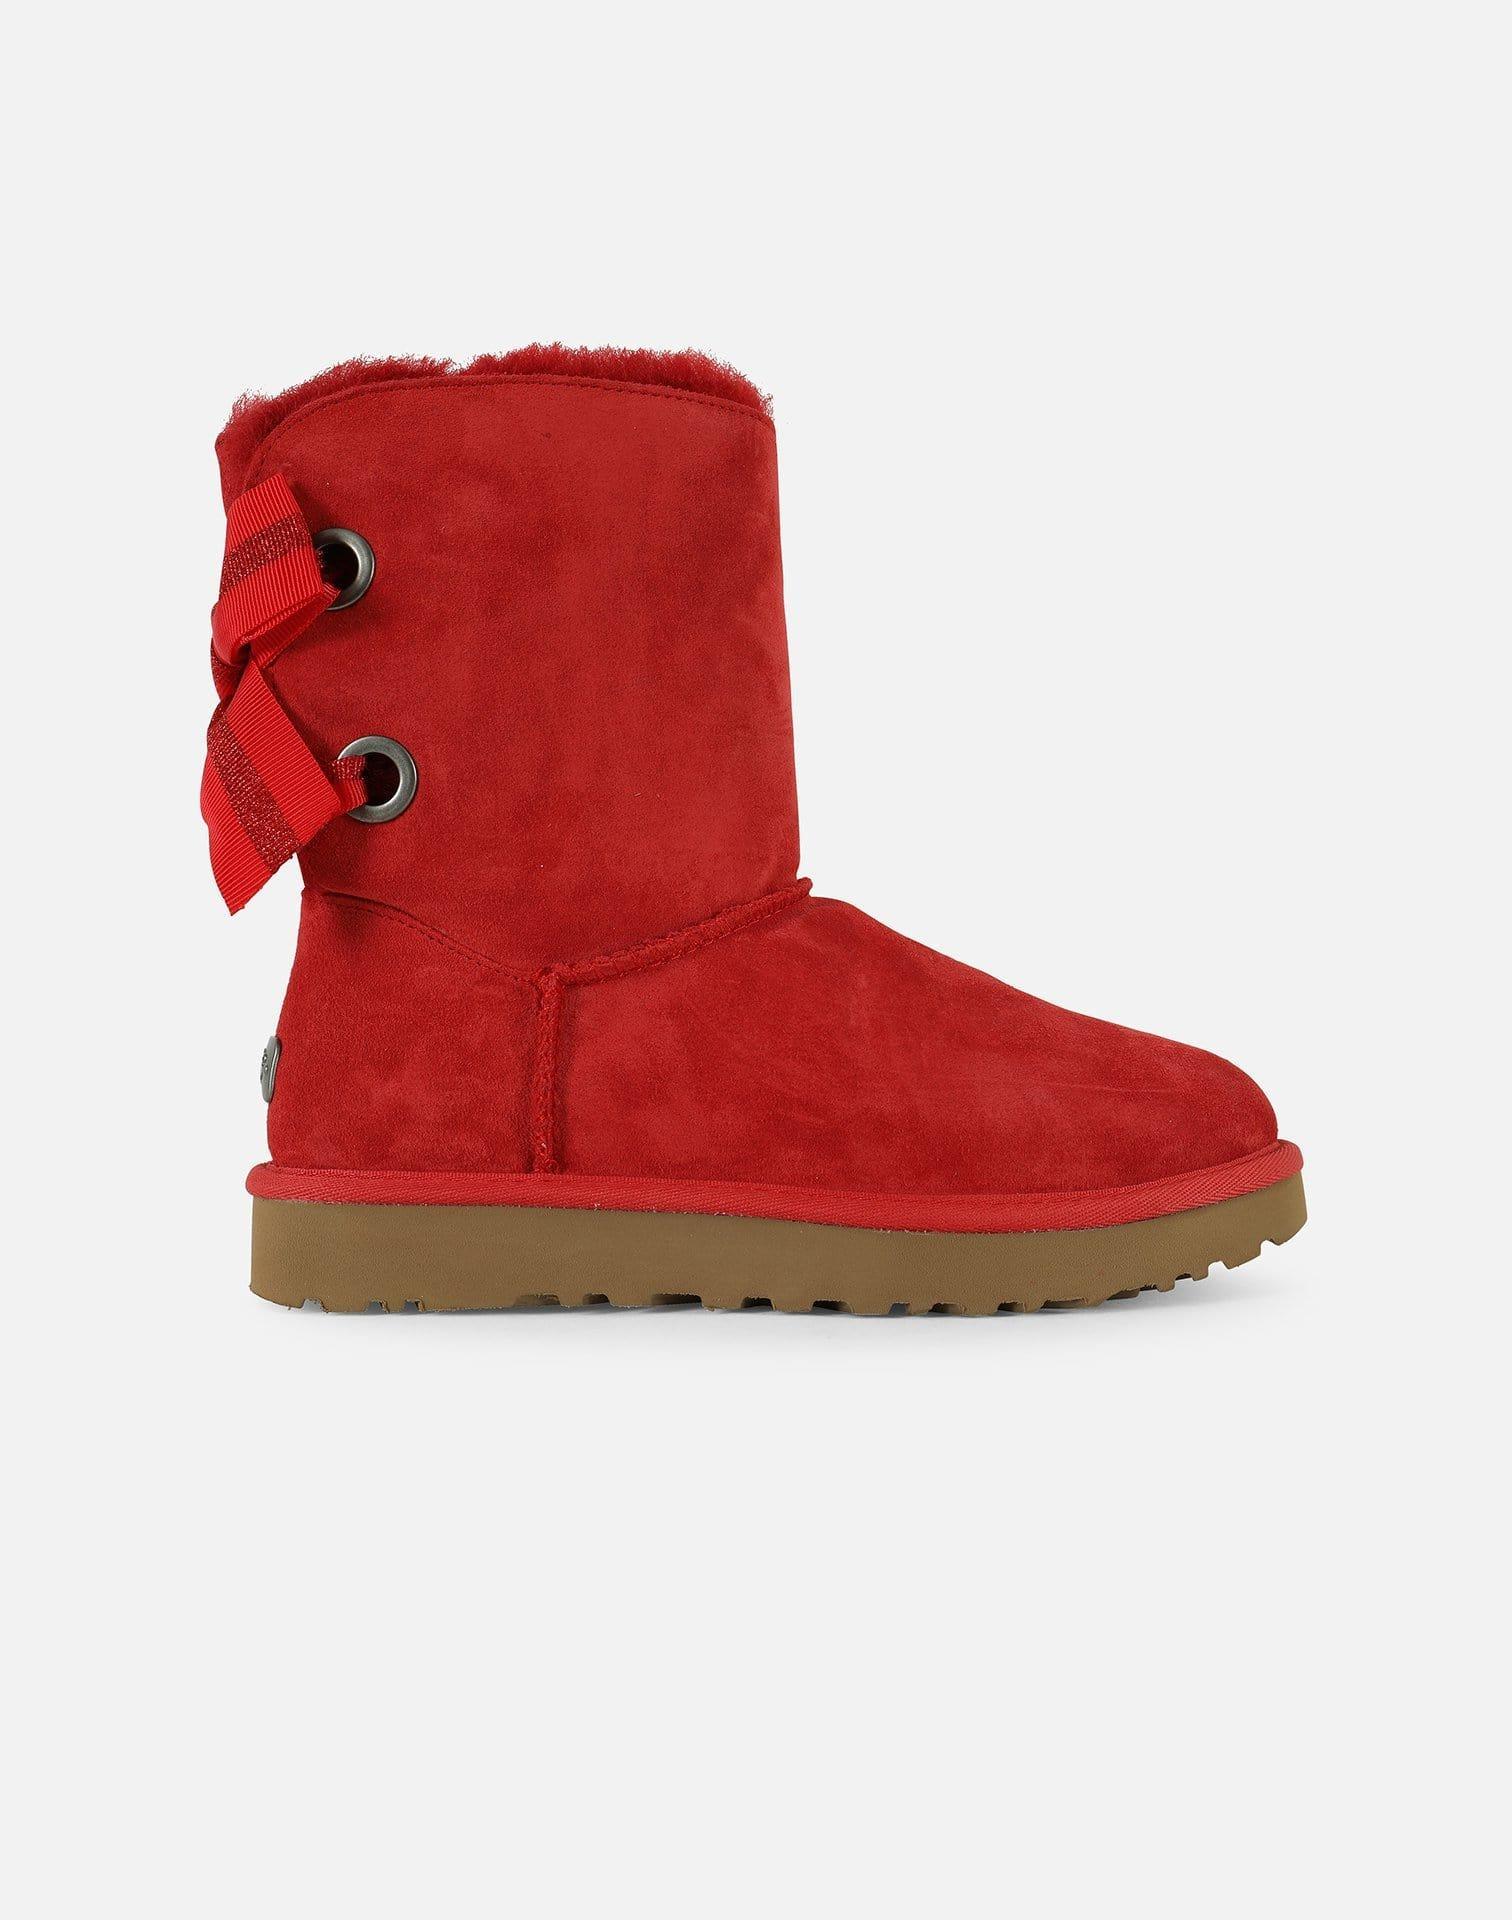 UGG CUSTOMIZABLE BAILEY BOW SHORT BOOTS Product Image